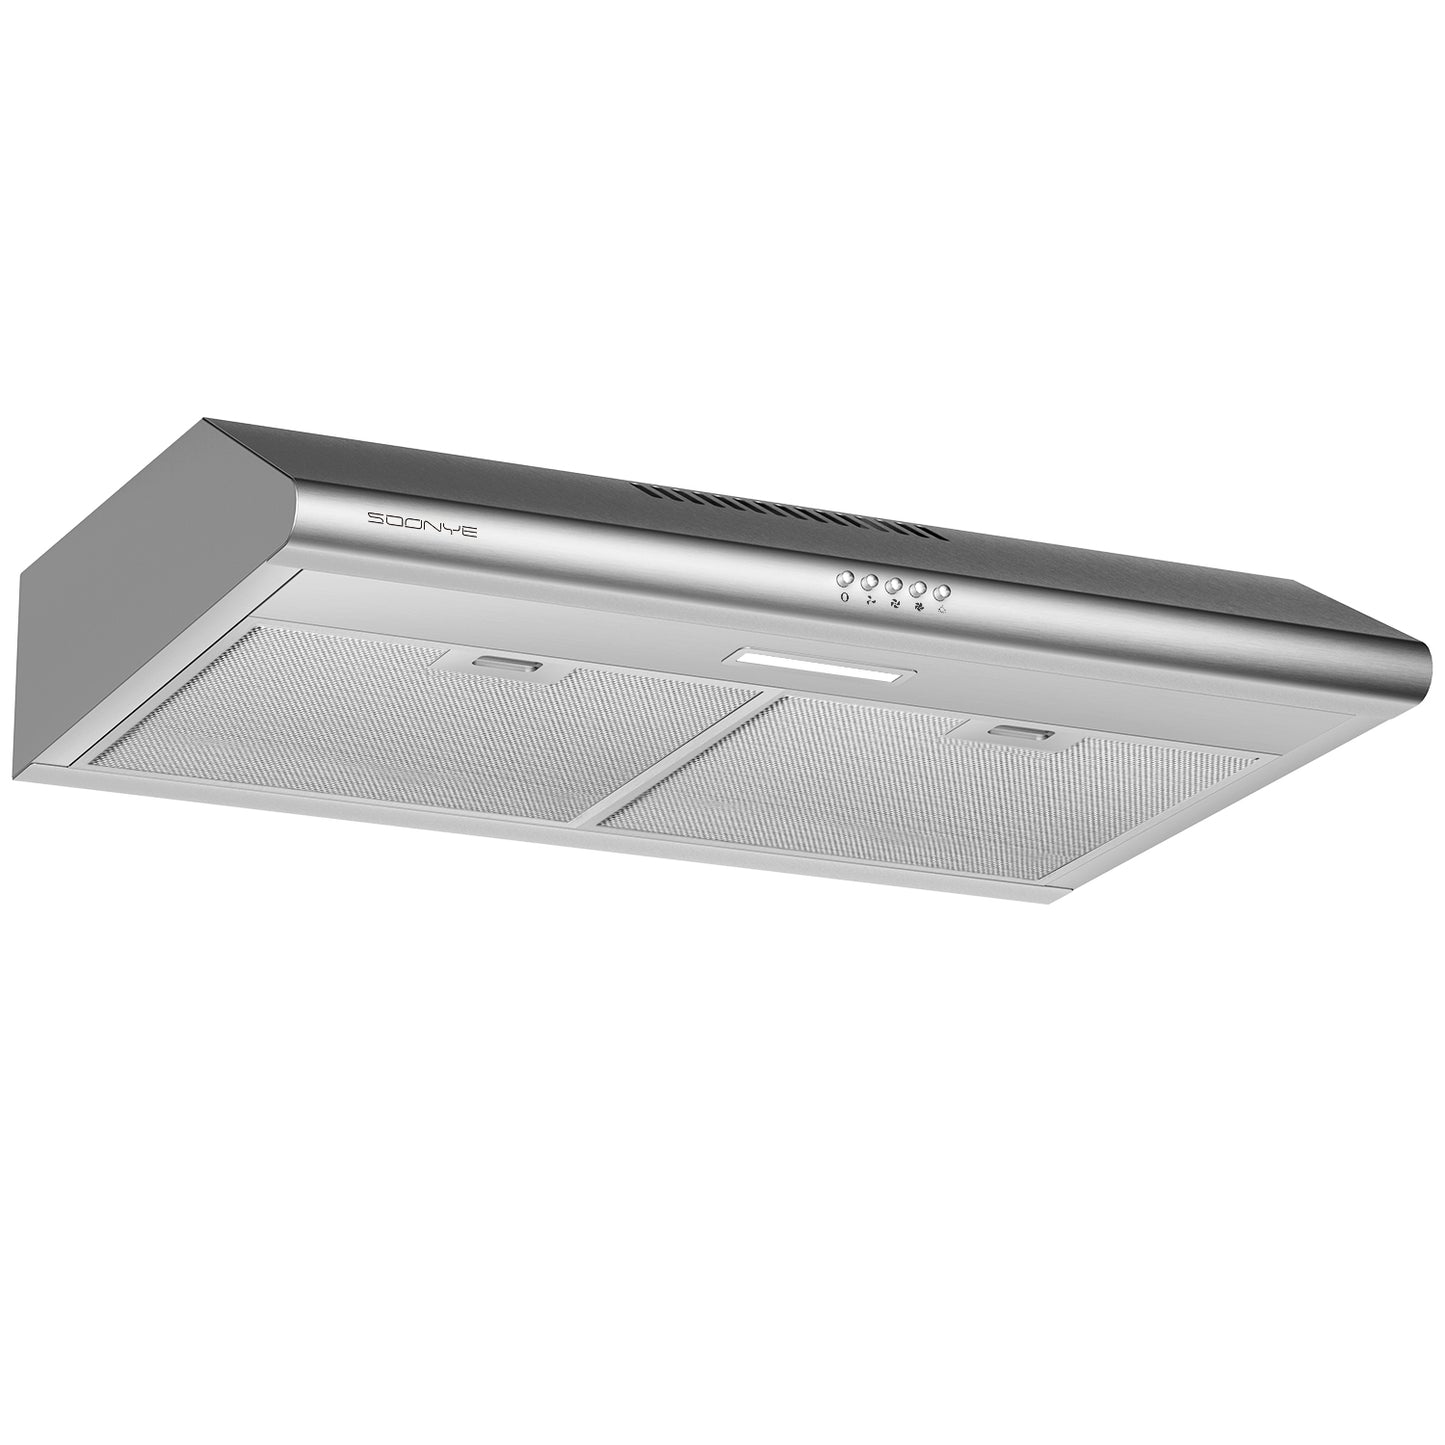 ONEEON Range Hood, 30 inch Slim Under Cabinet Range Hood with 4 Speed Exhaust Fan, 2 Extra Reusable Filters, LED Lights, Stainless Steel Kitchen Hood